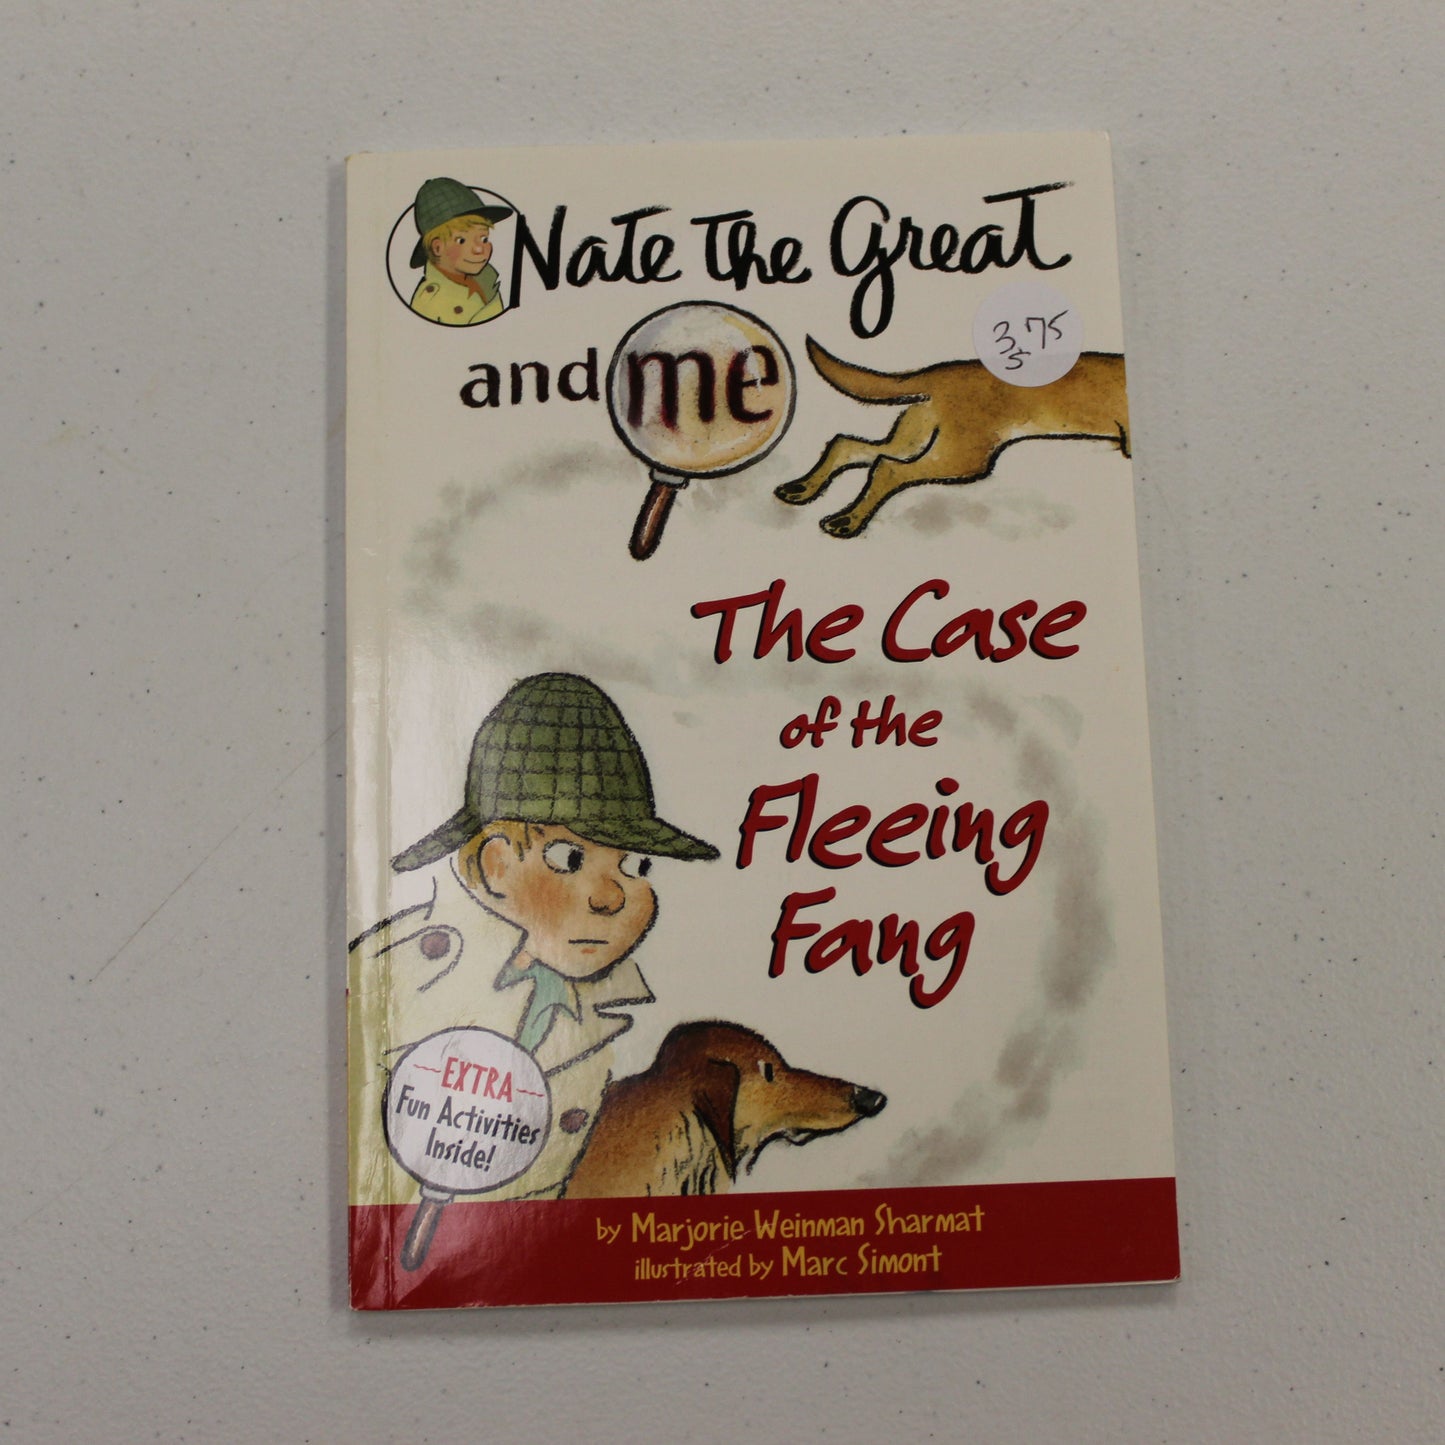 NATE THE GREAT AND ME: THE CASE OF THE FLEEING FANG